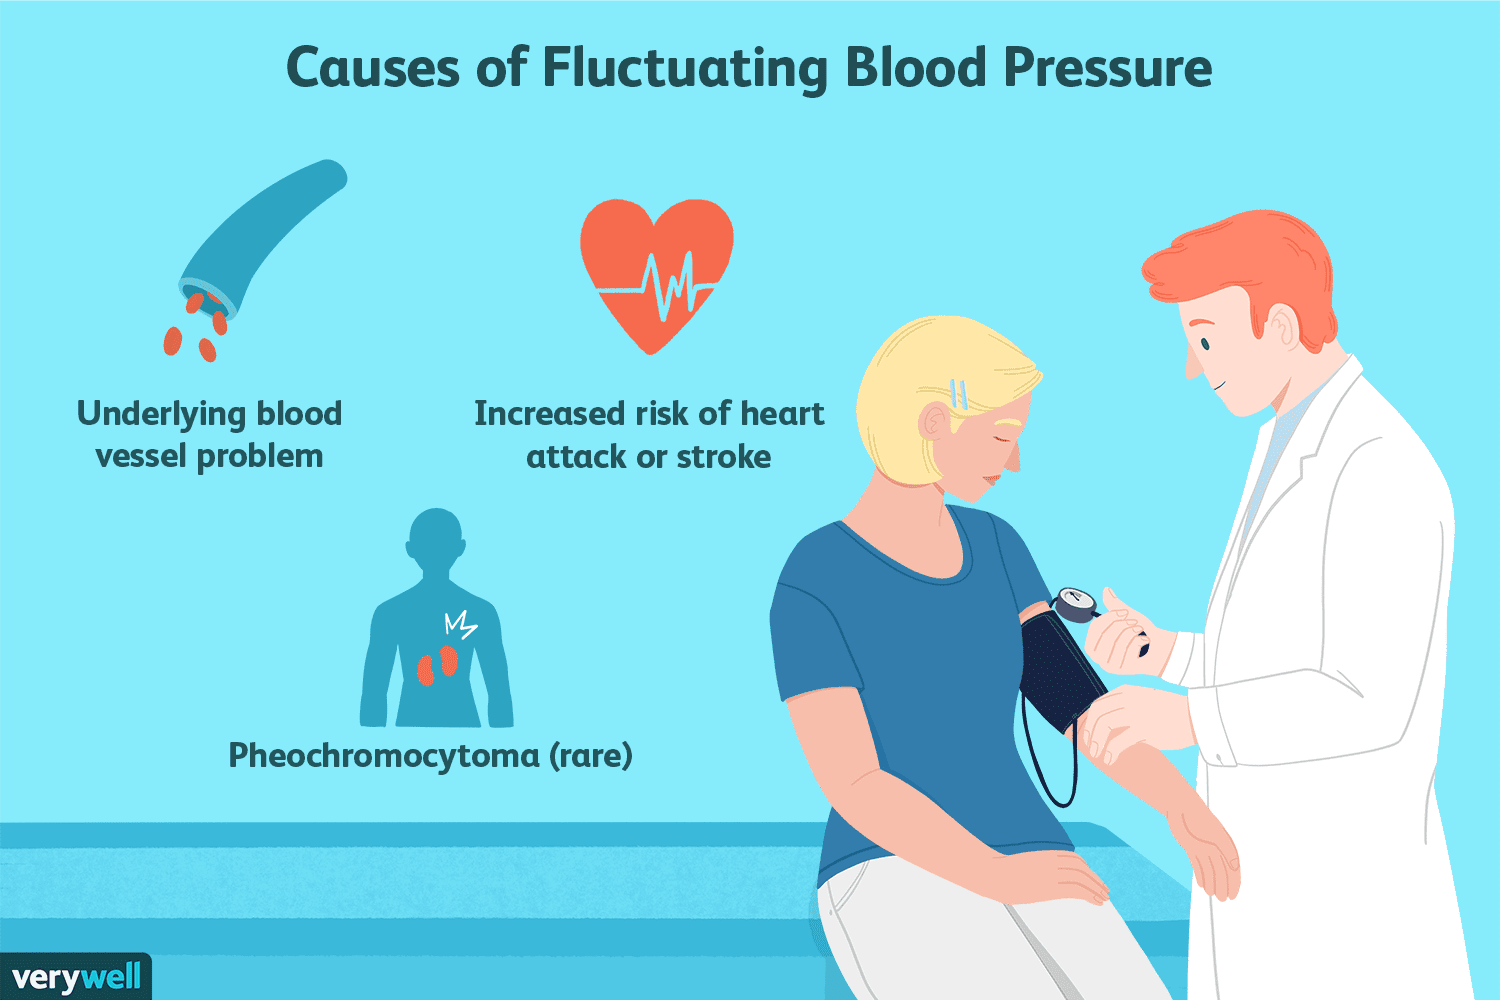 Is It Normal for Blood Pressure to Fluctuate?